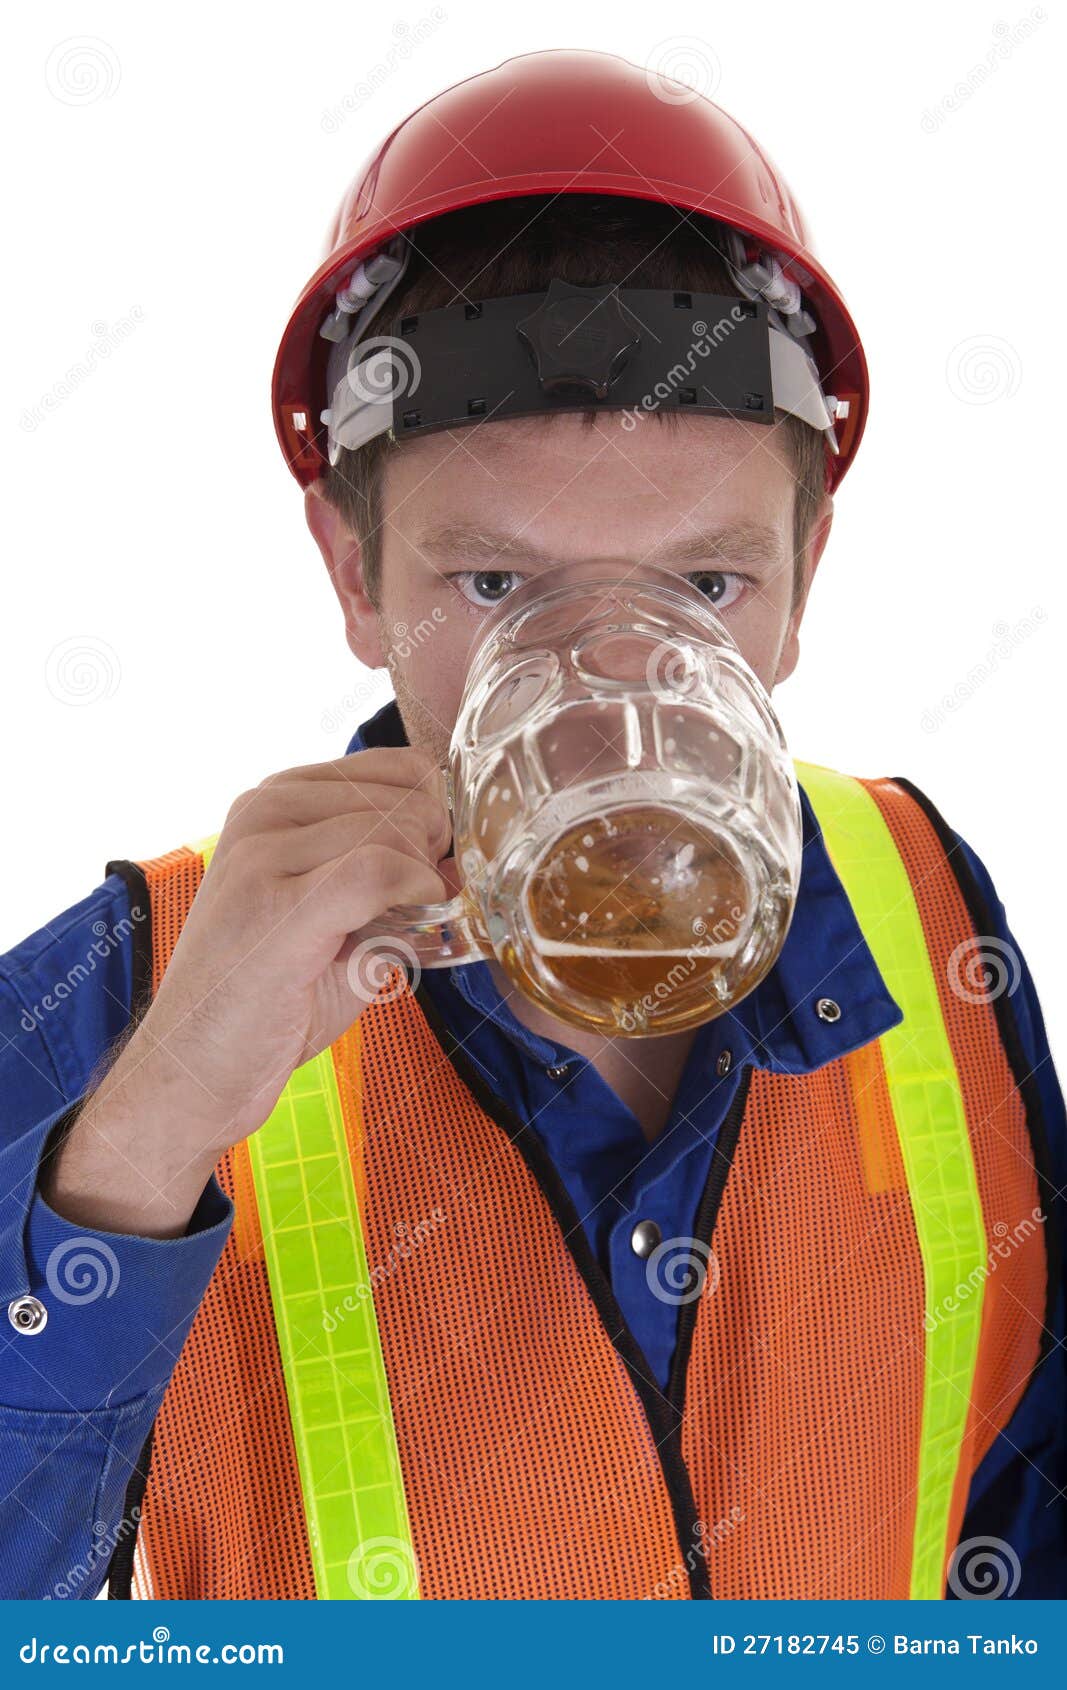 Drunk at work stock image. Image of helmet, trade, alcohol - 27182745